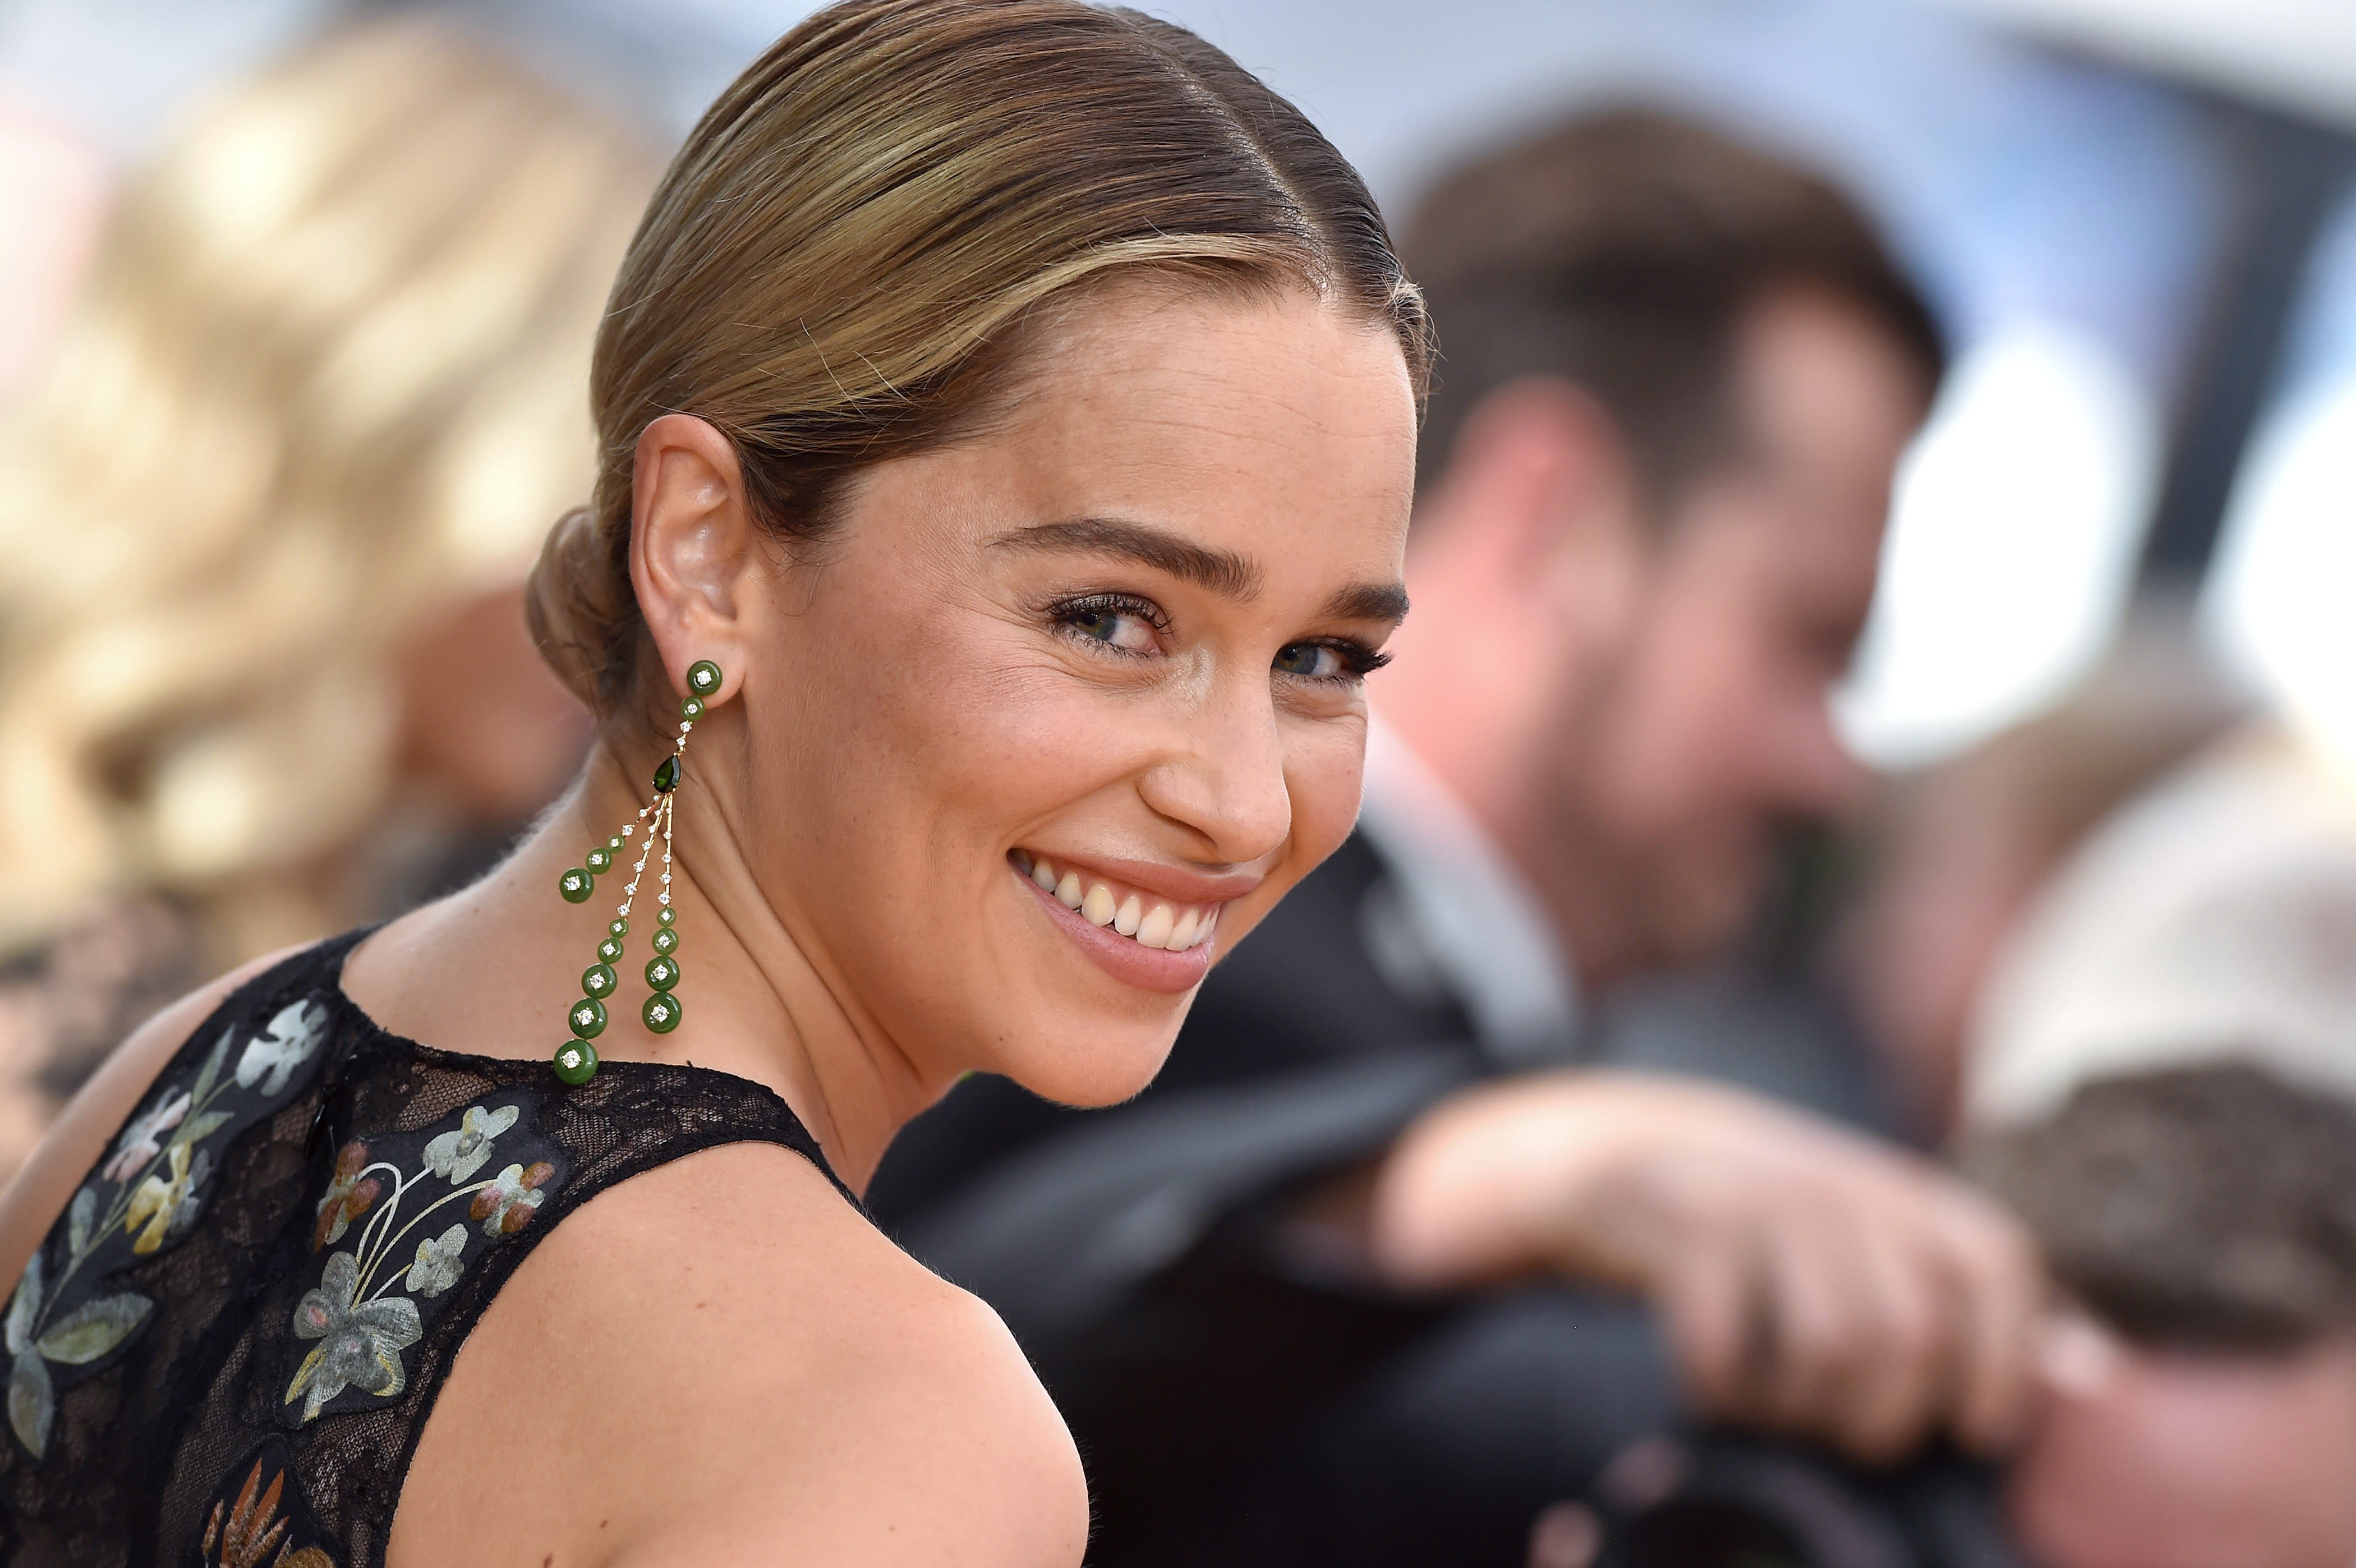 Emilia Clarke Commemorated The Game Of Thrones Finale With A Tattoo